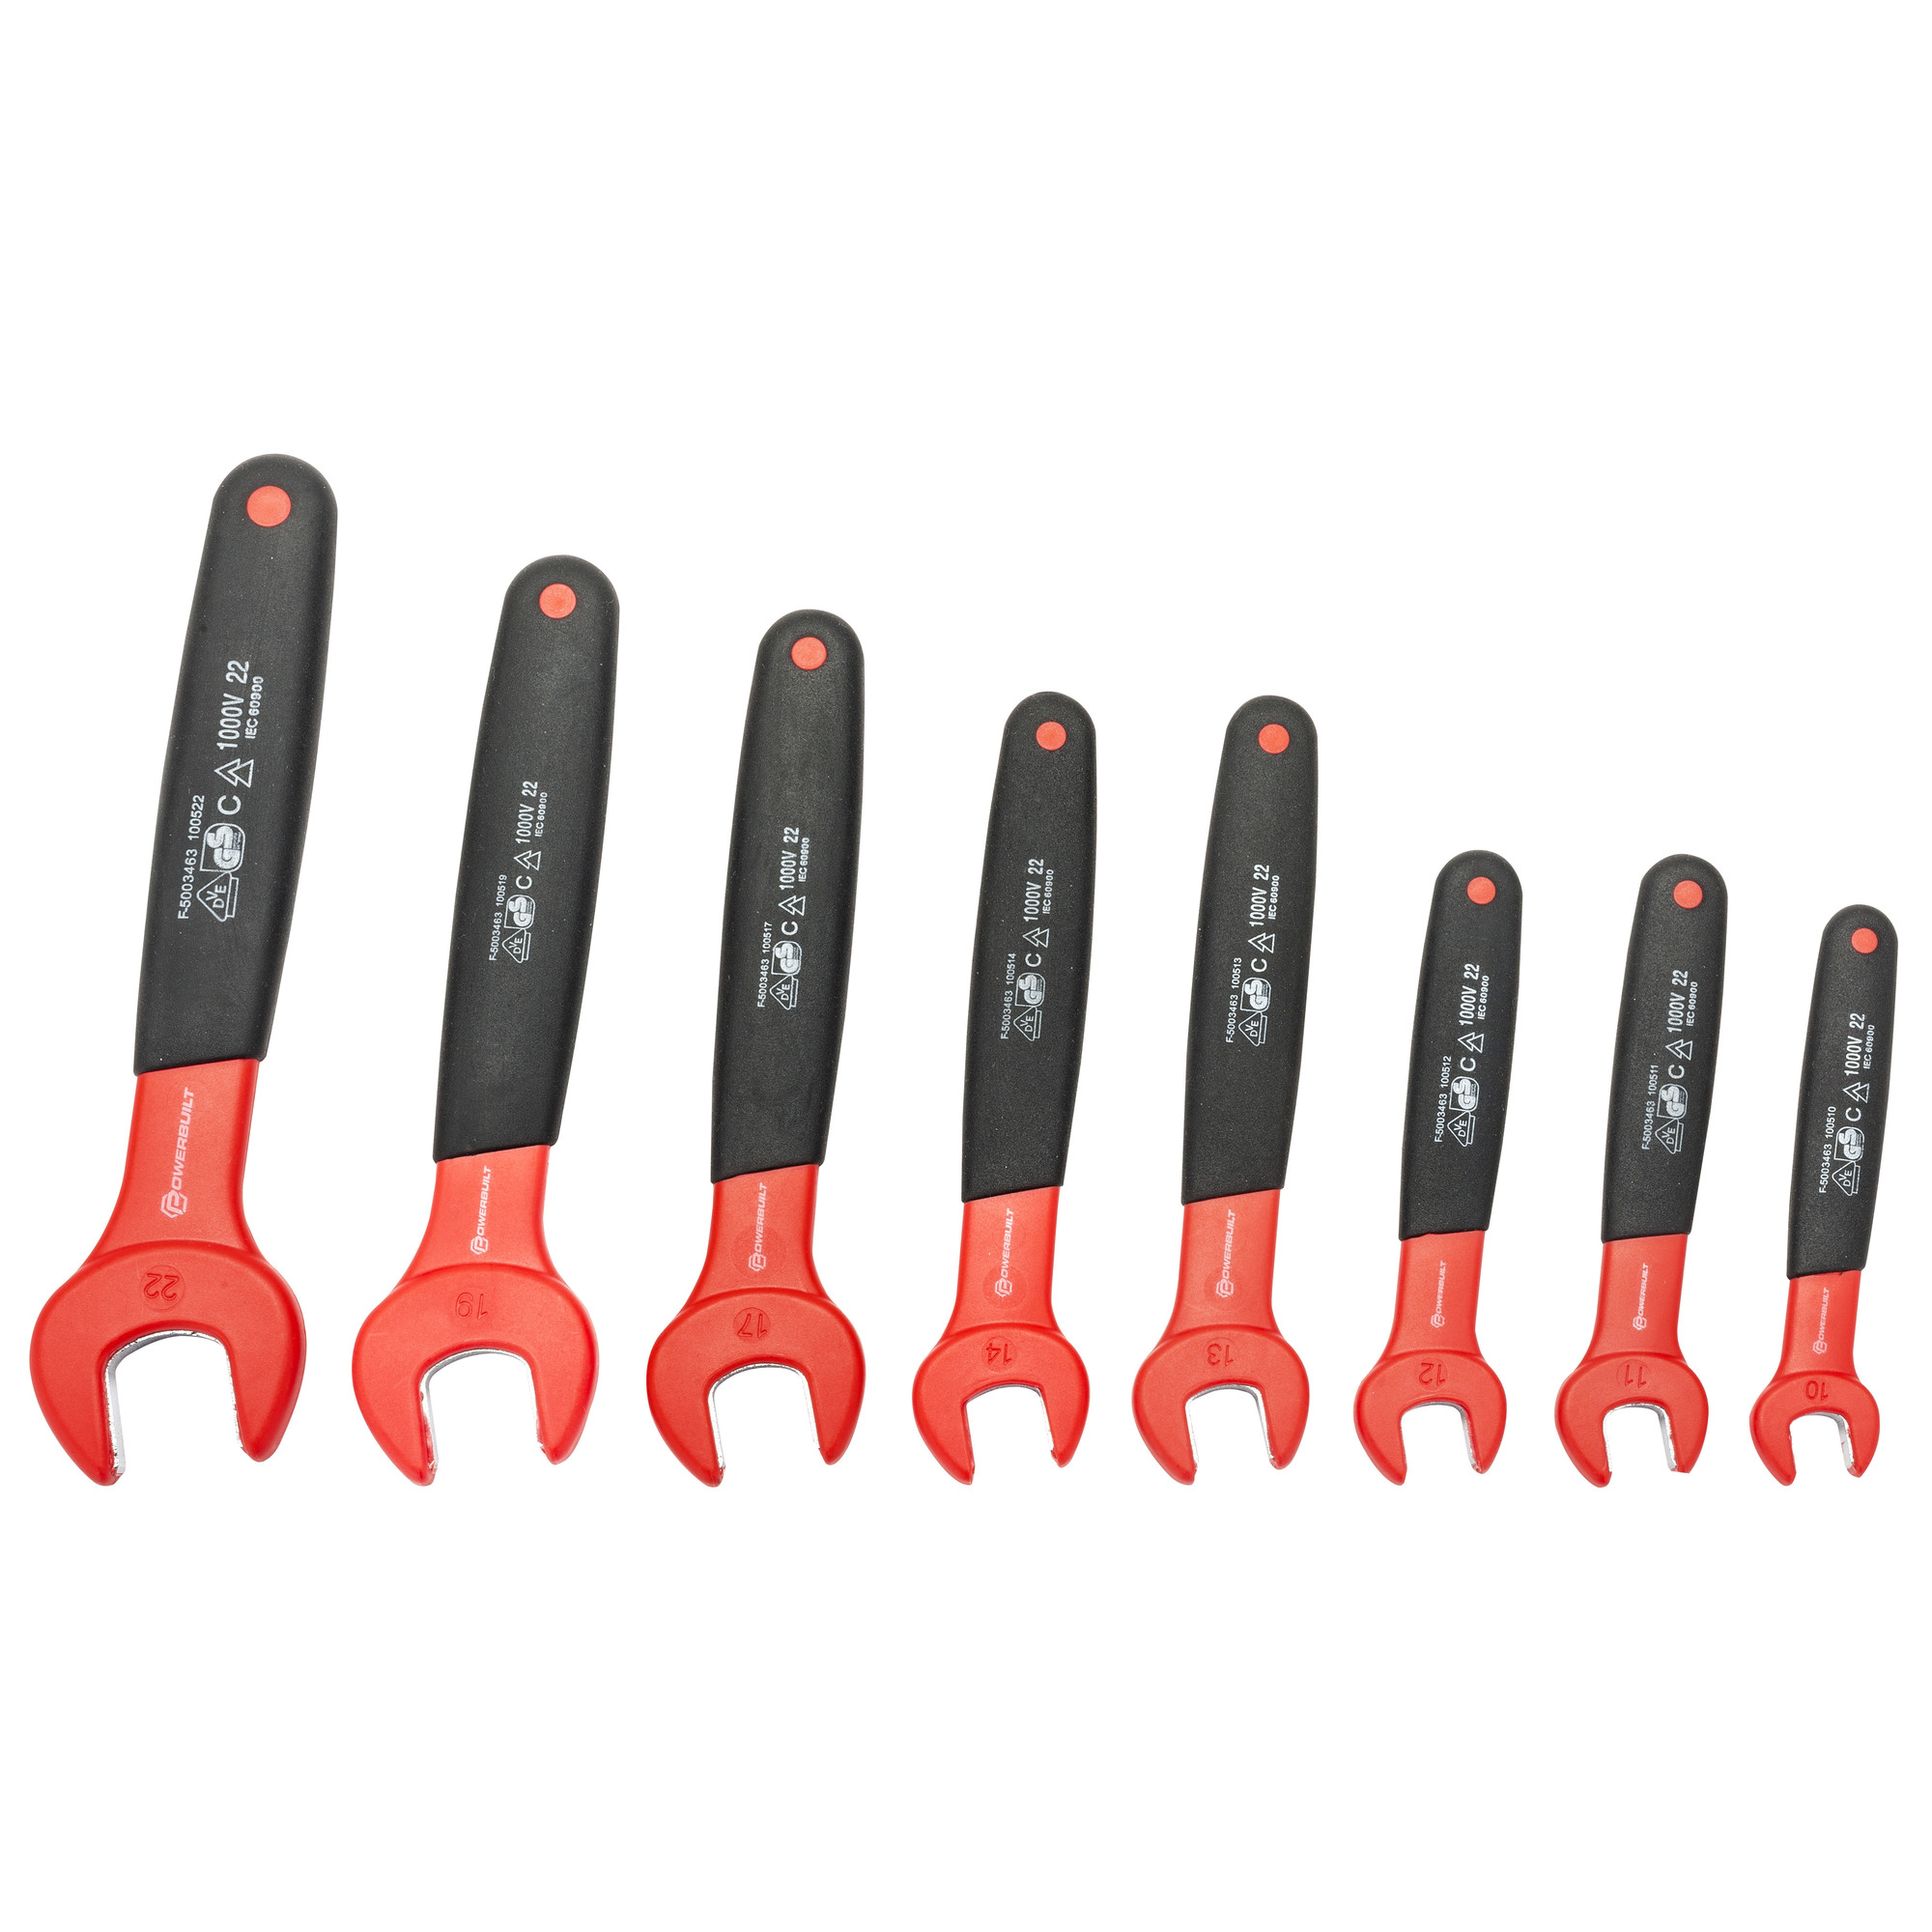 Powerbuilt, 8 Piece Insulated VDE Open End Wrench Set (Metric), Pieces (qty.) 8 Model 642959